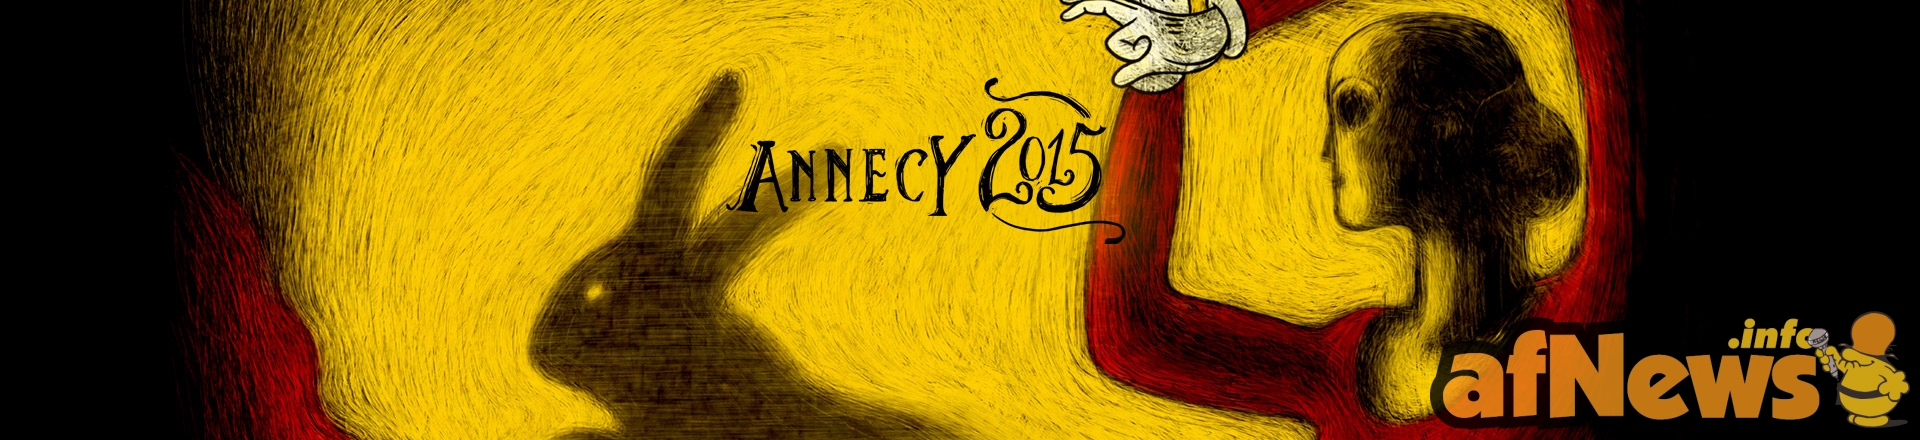 homeAfficheANNECY2015